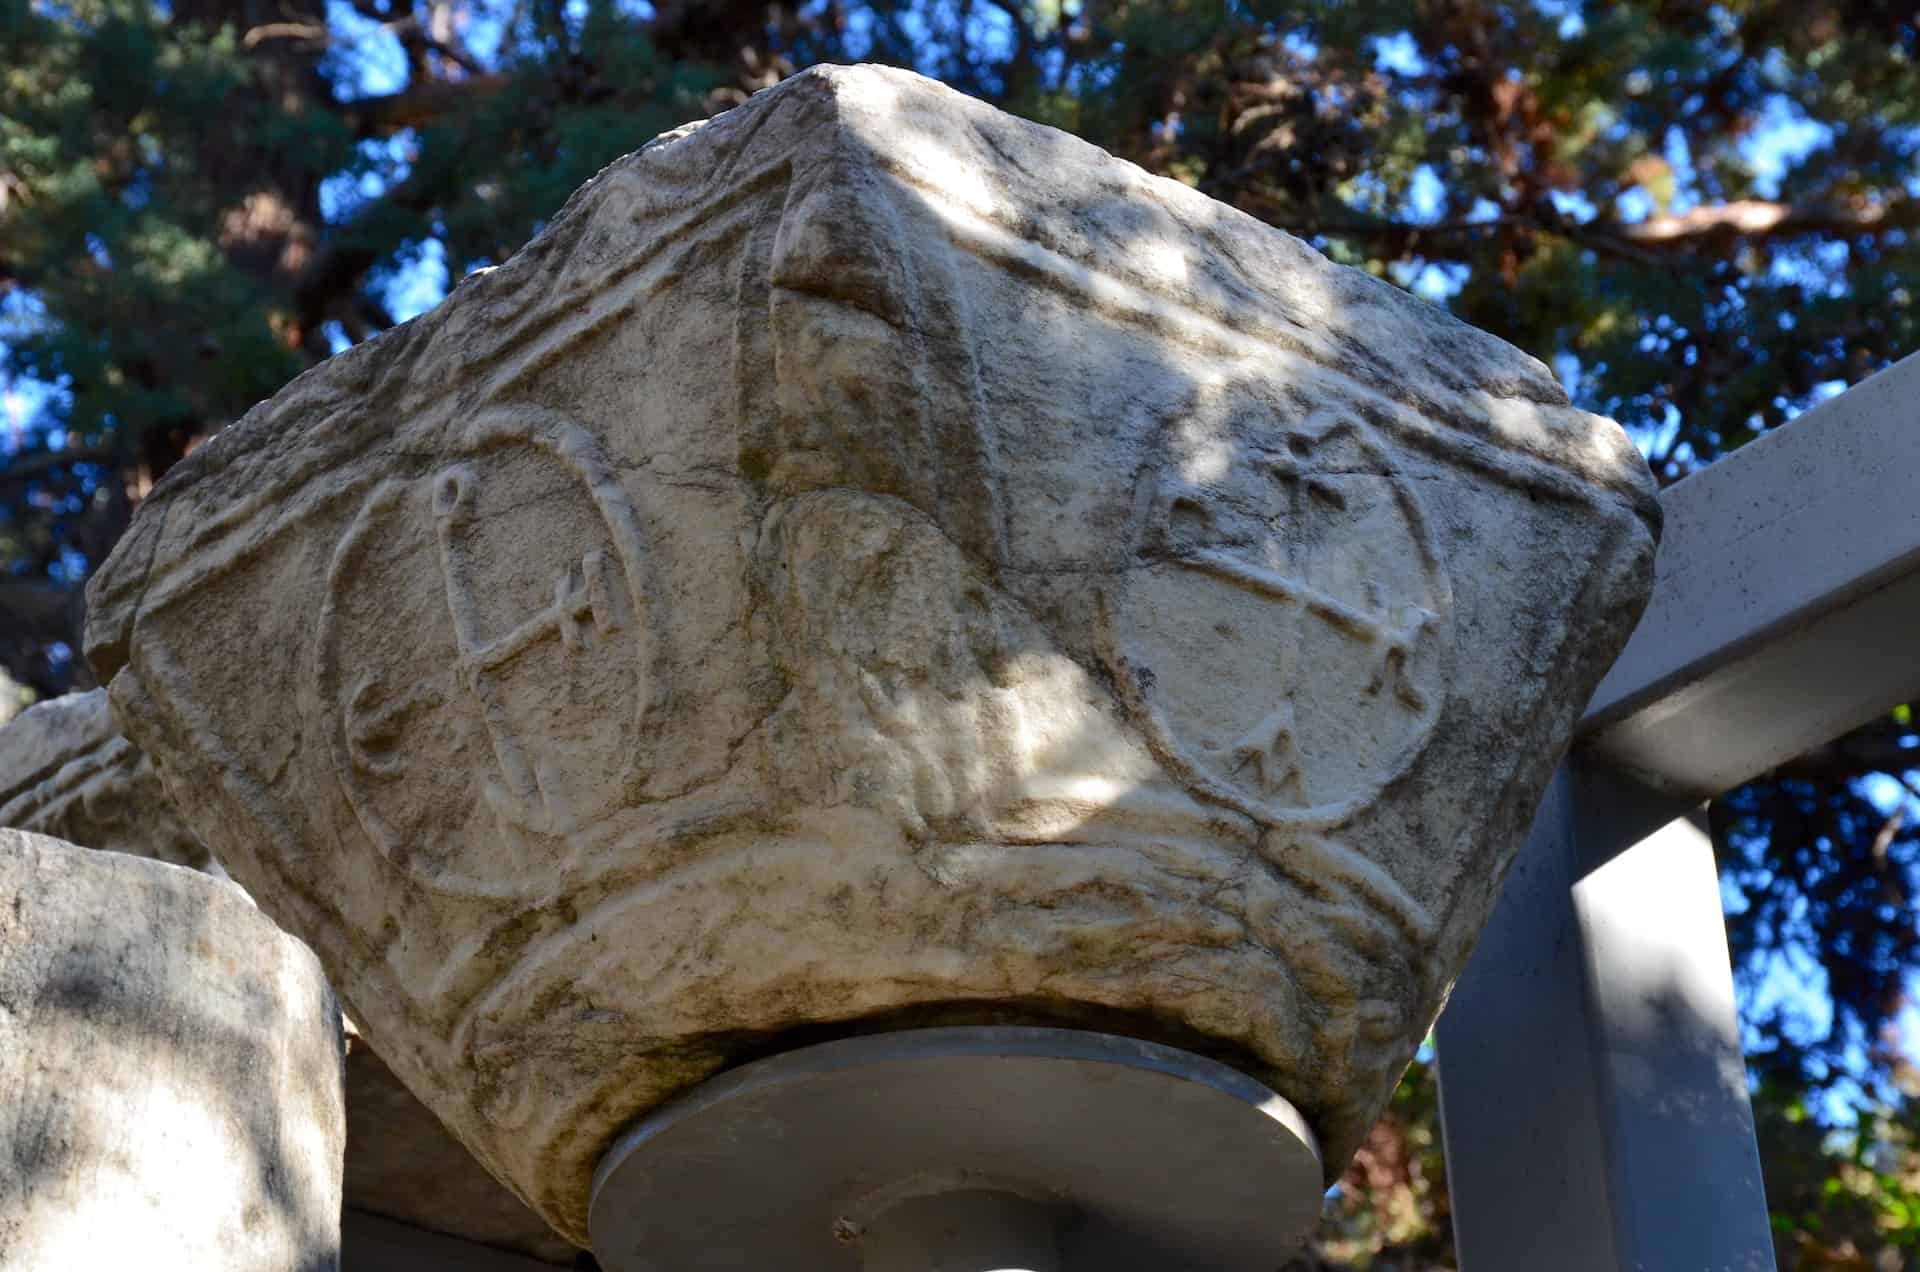 Column capital with the abbreviated inscription "Mother of God, please aid Empress Irene", 8th century AD in the Byzantine Church in the Paradise exhibit in the gardens at Villa Ilissia (Byzantine Museum) in Athens, Greece